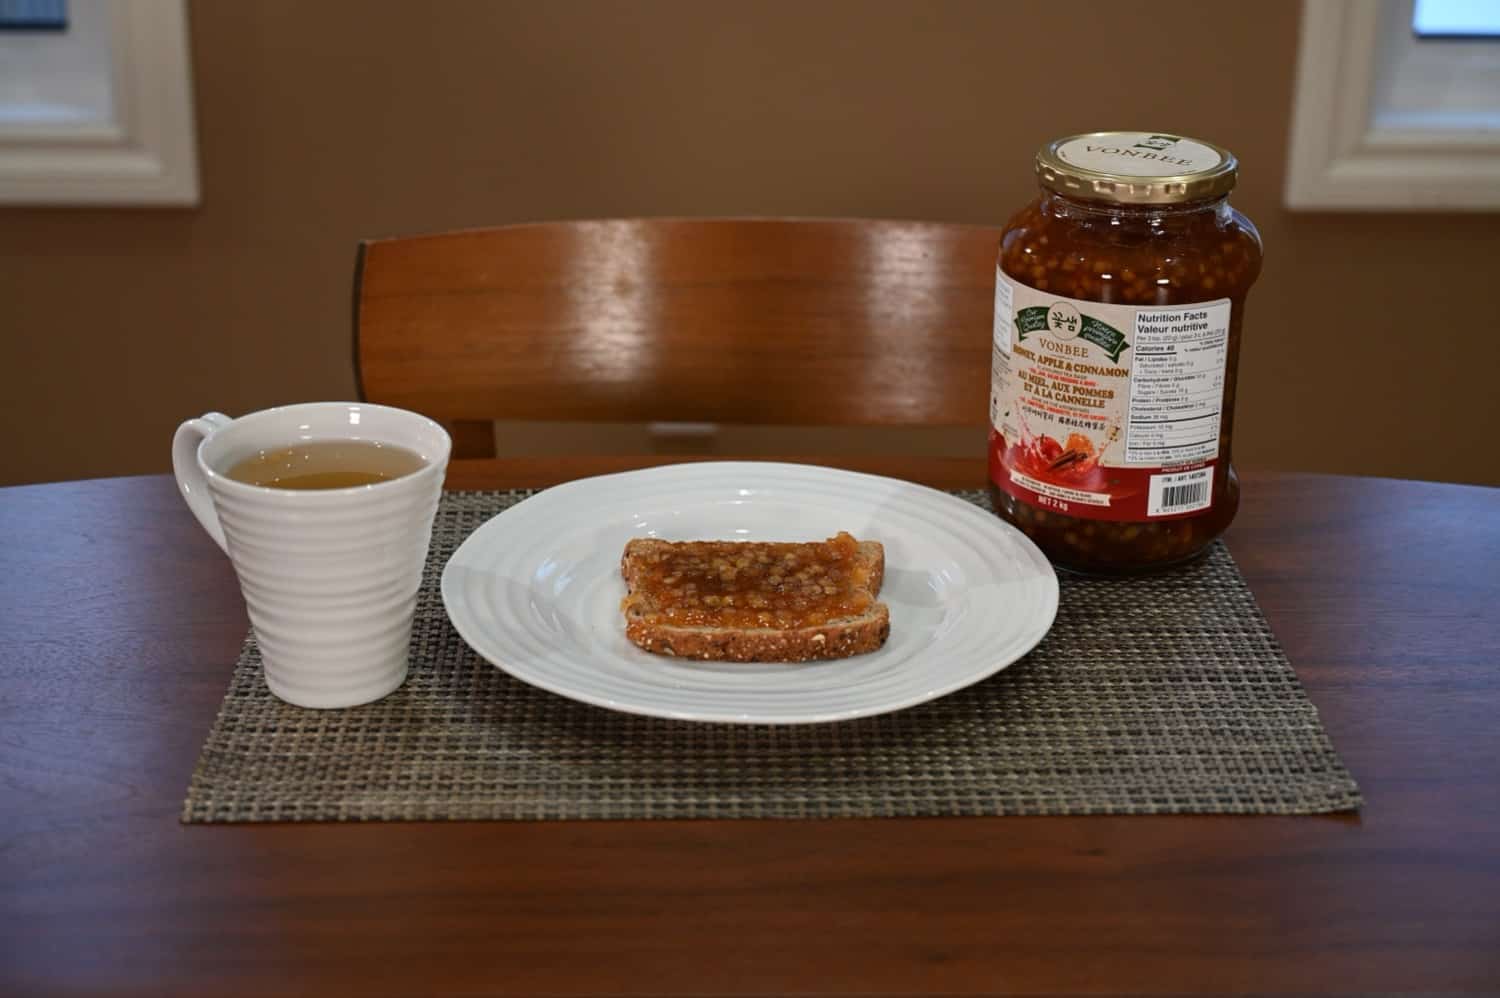 Another photo of the jar of tea base alongside the toast covered in the tea base and the tea made from the tea base.